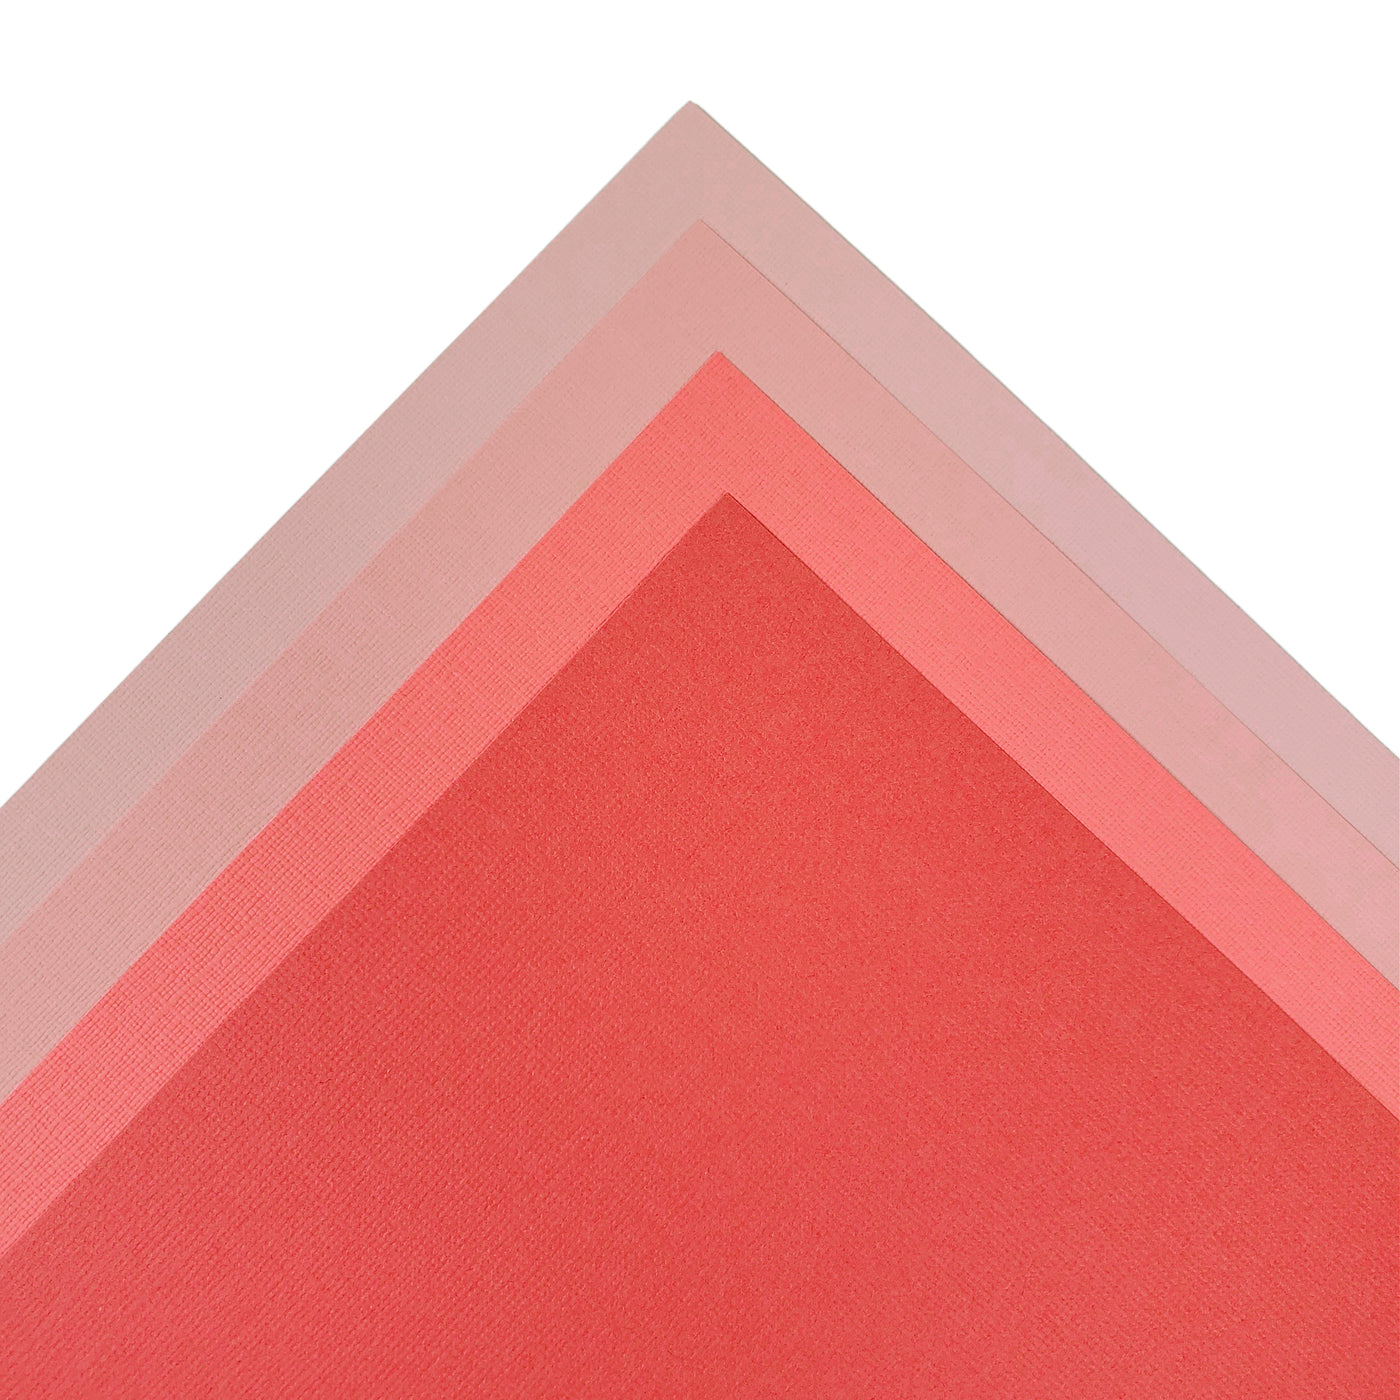 The Coral monochromatic assortment includes three (3) each of four (4) shades of coral peach colors of Bazzill textured cardstock.